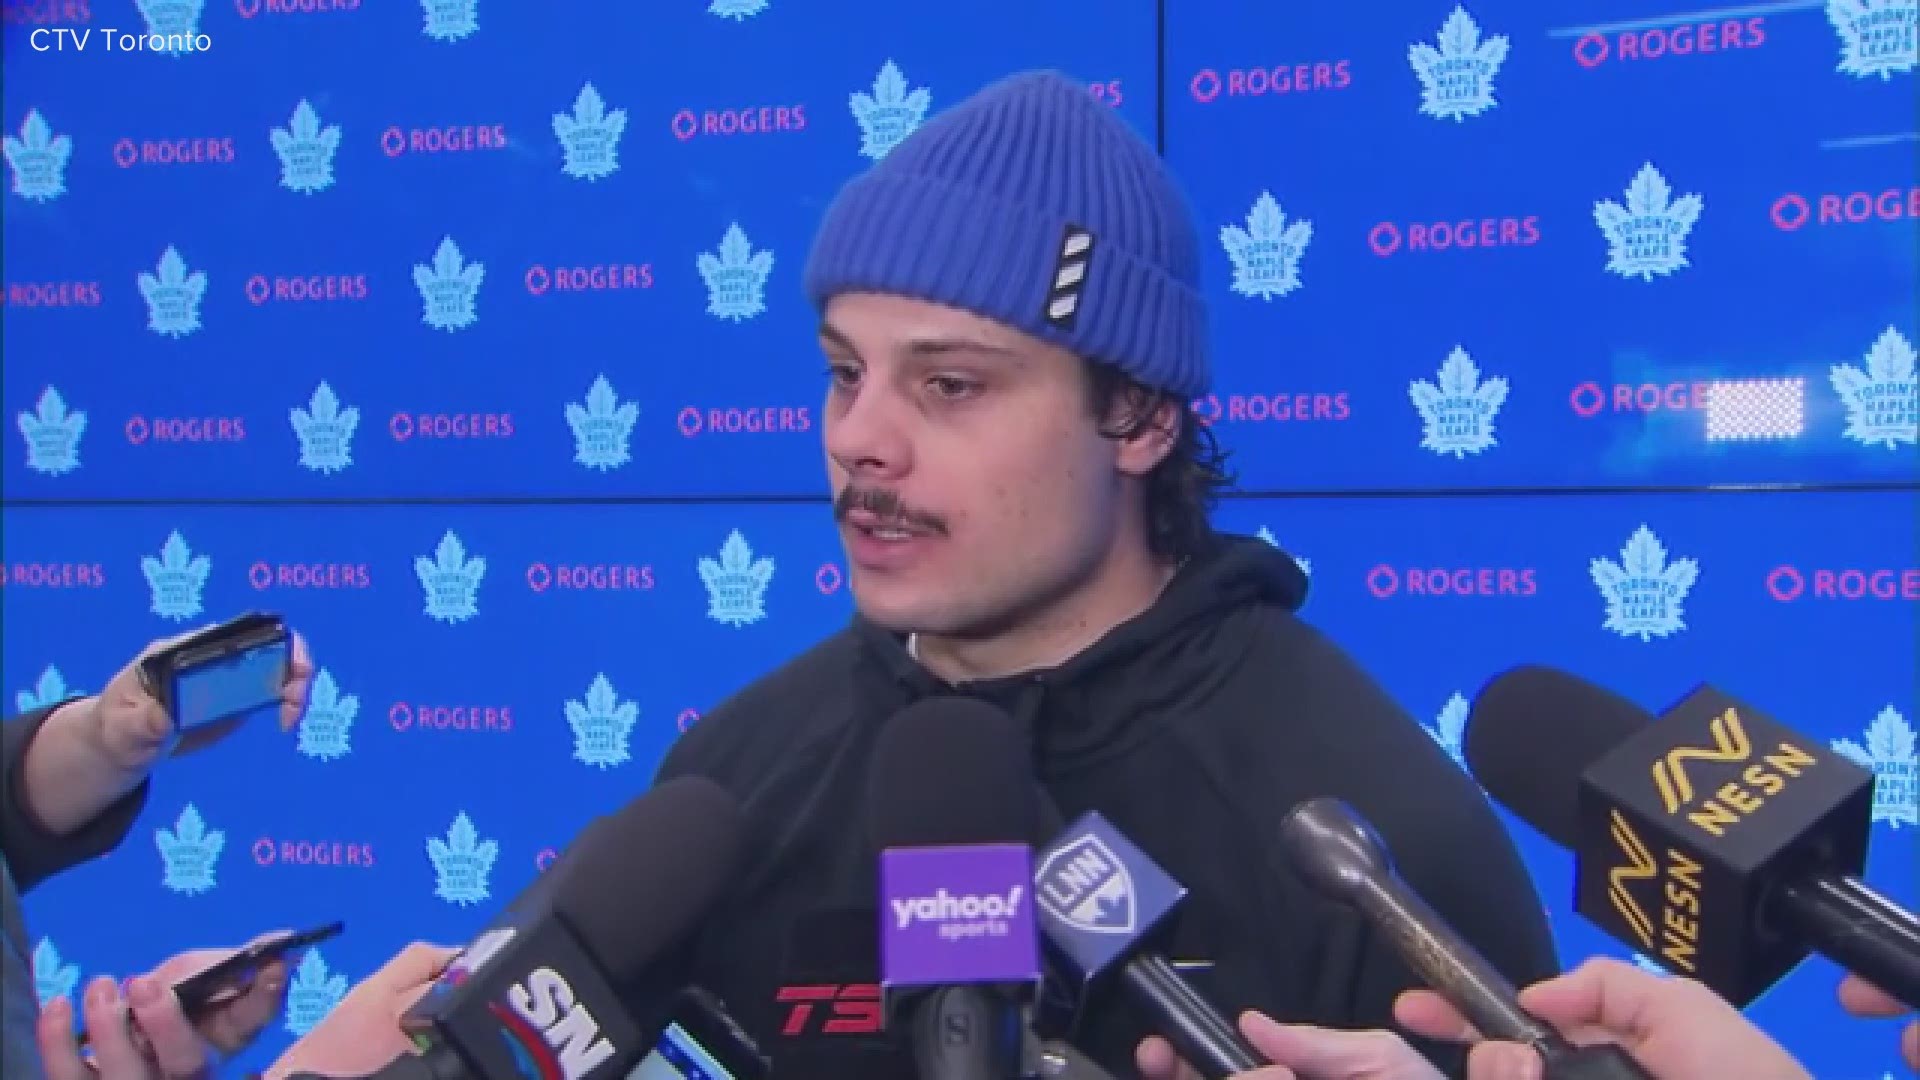 Toronto Maple Leafs forward Auston Matthews says "It's a lesson learned," and apologized. Disorderly conduct charges against him were dropped.